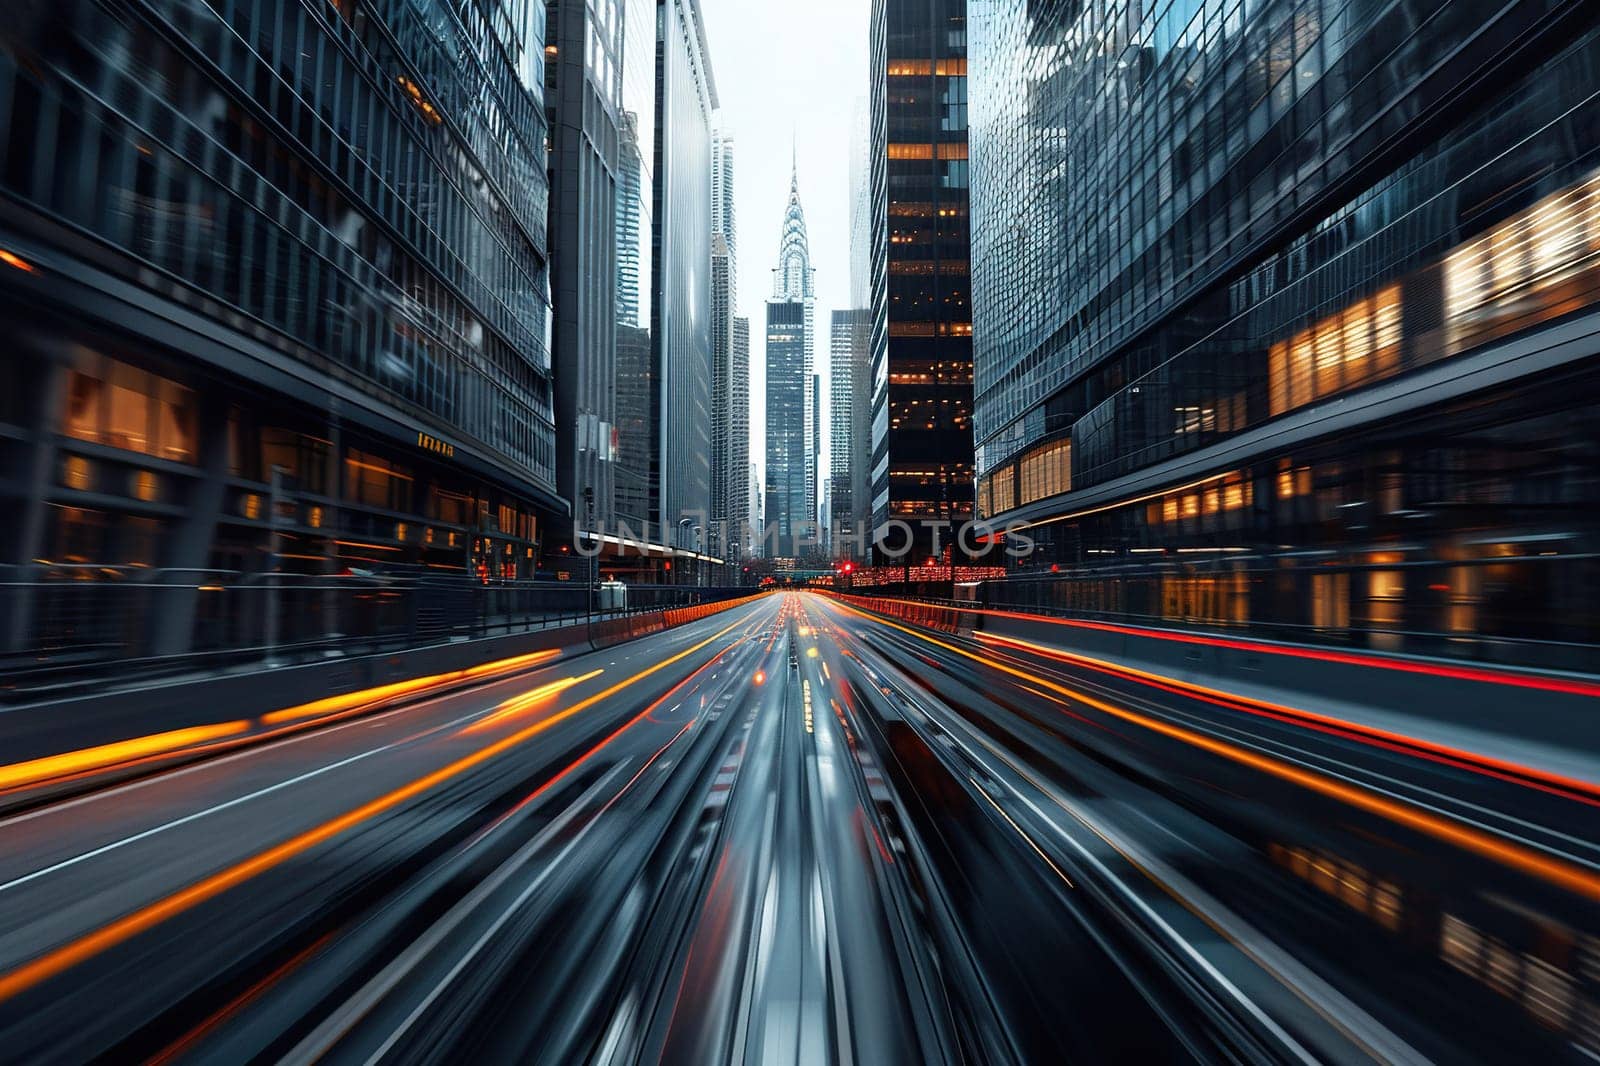 Photo in motion depicting a highway in a metropolis. Light paths against the background of skyscrapers.